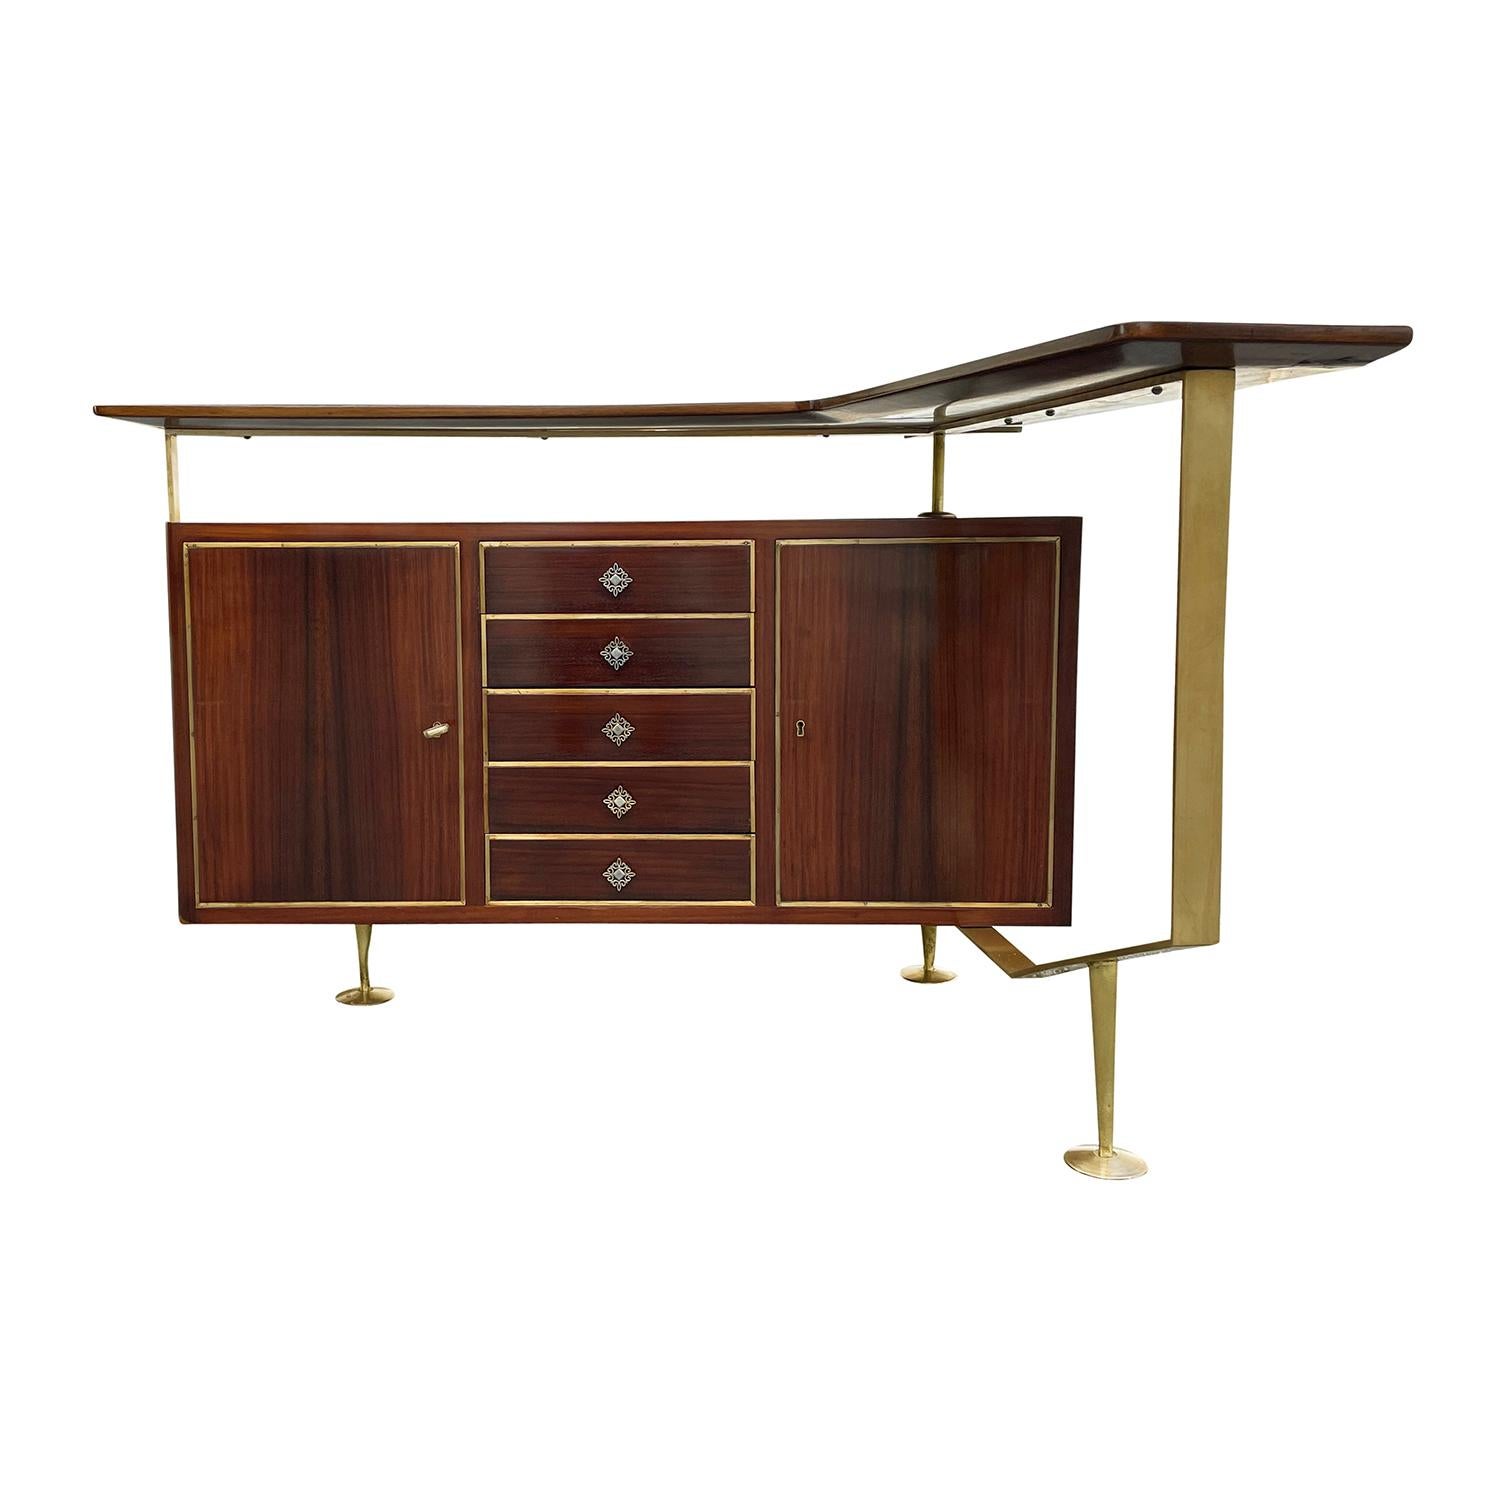 A light-brown, vintage Mid-Century Modern Italian narrow cocktail bar with an elevated L-form top, made of hand crafted polished, partly veneered Walnut in good condition. The freestanding cabinet is composed with two doors and five drawers,